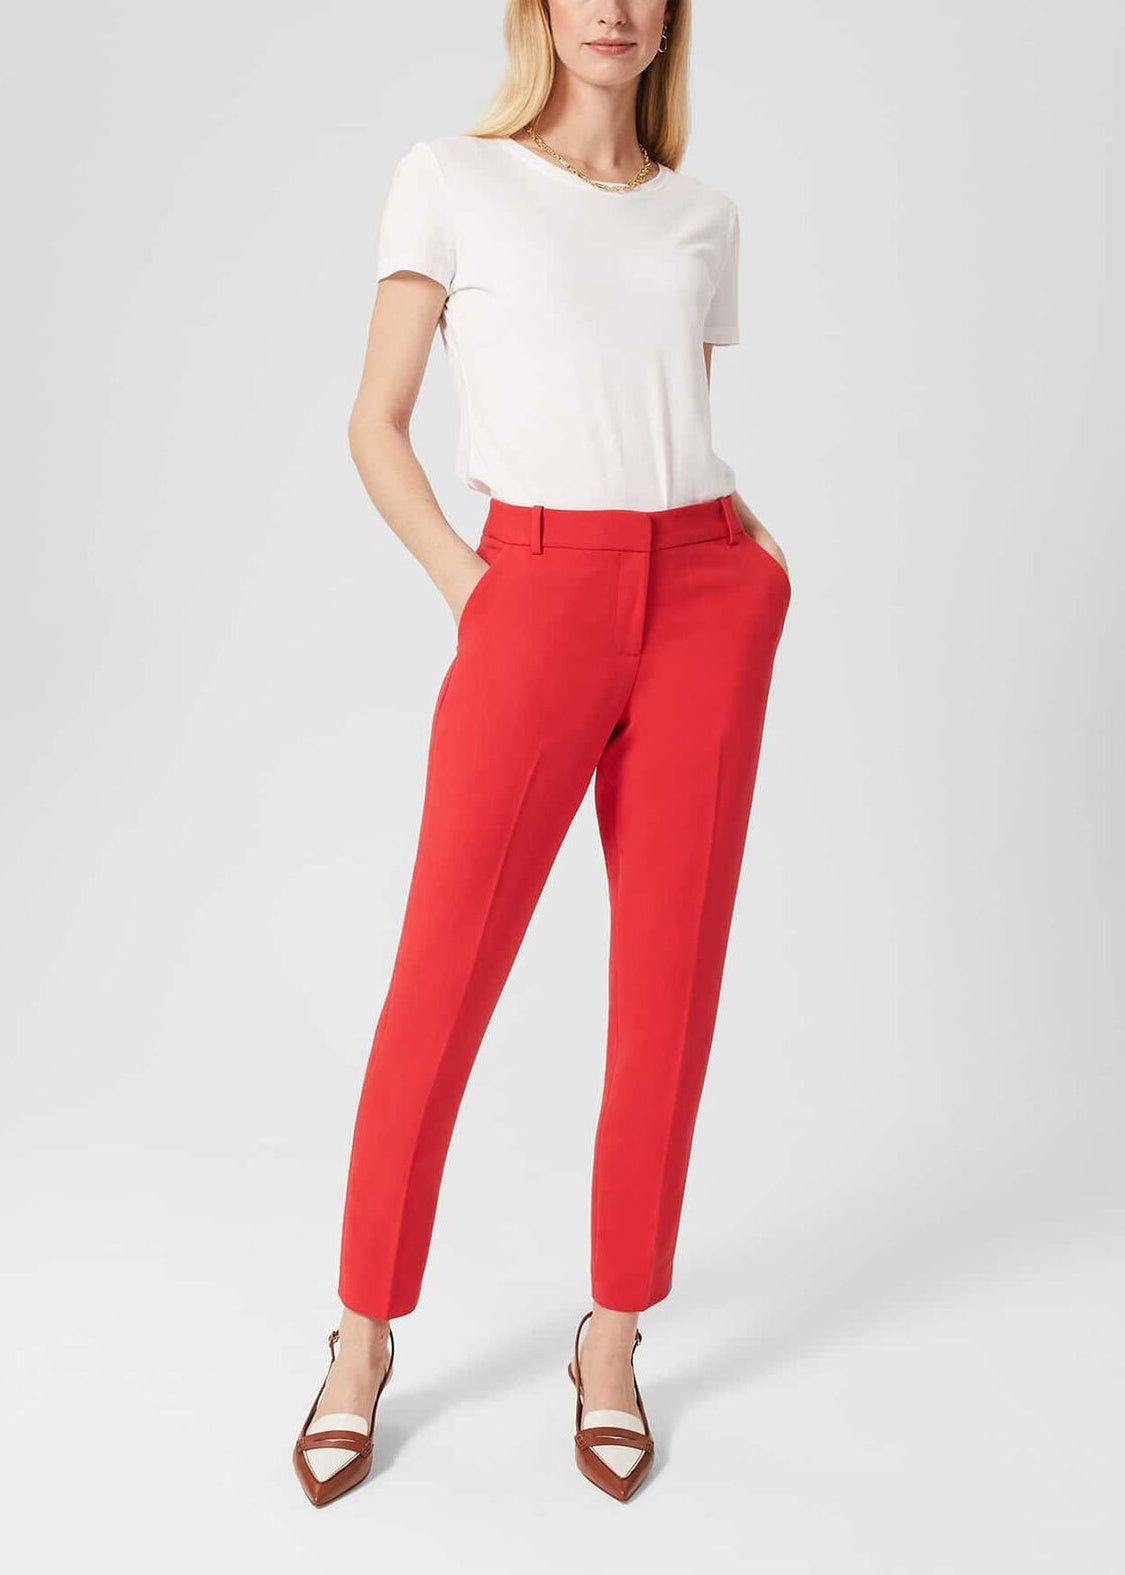 Suki Trousers 0123/8104/9845l00 Flame-Red